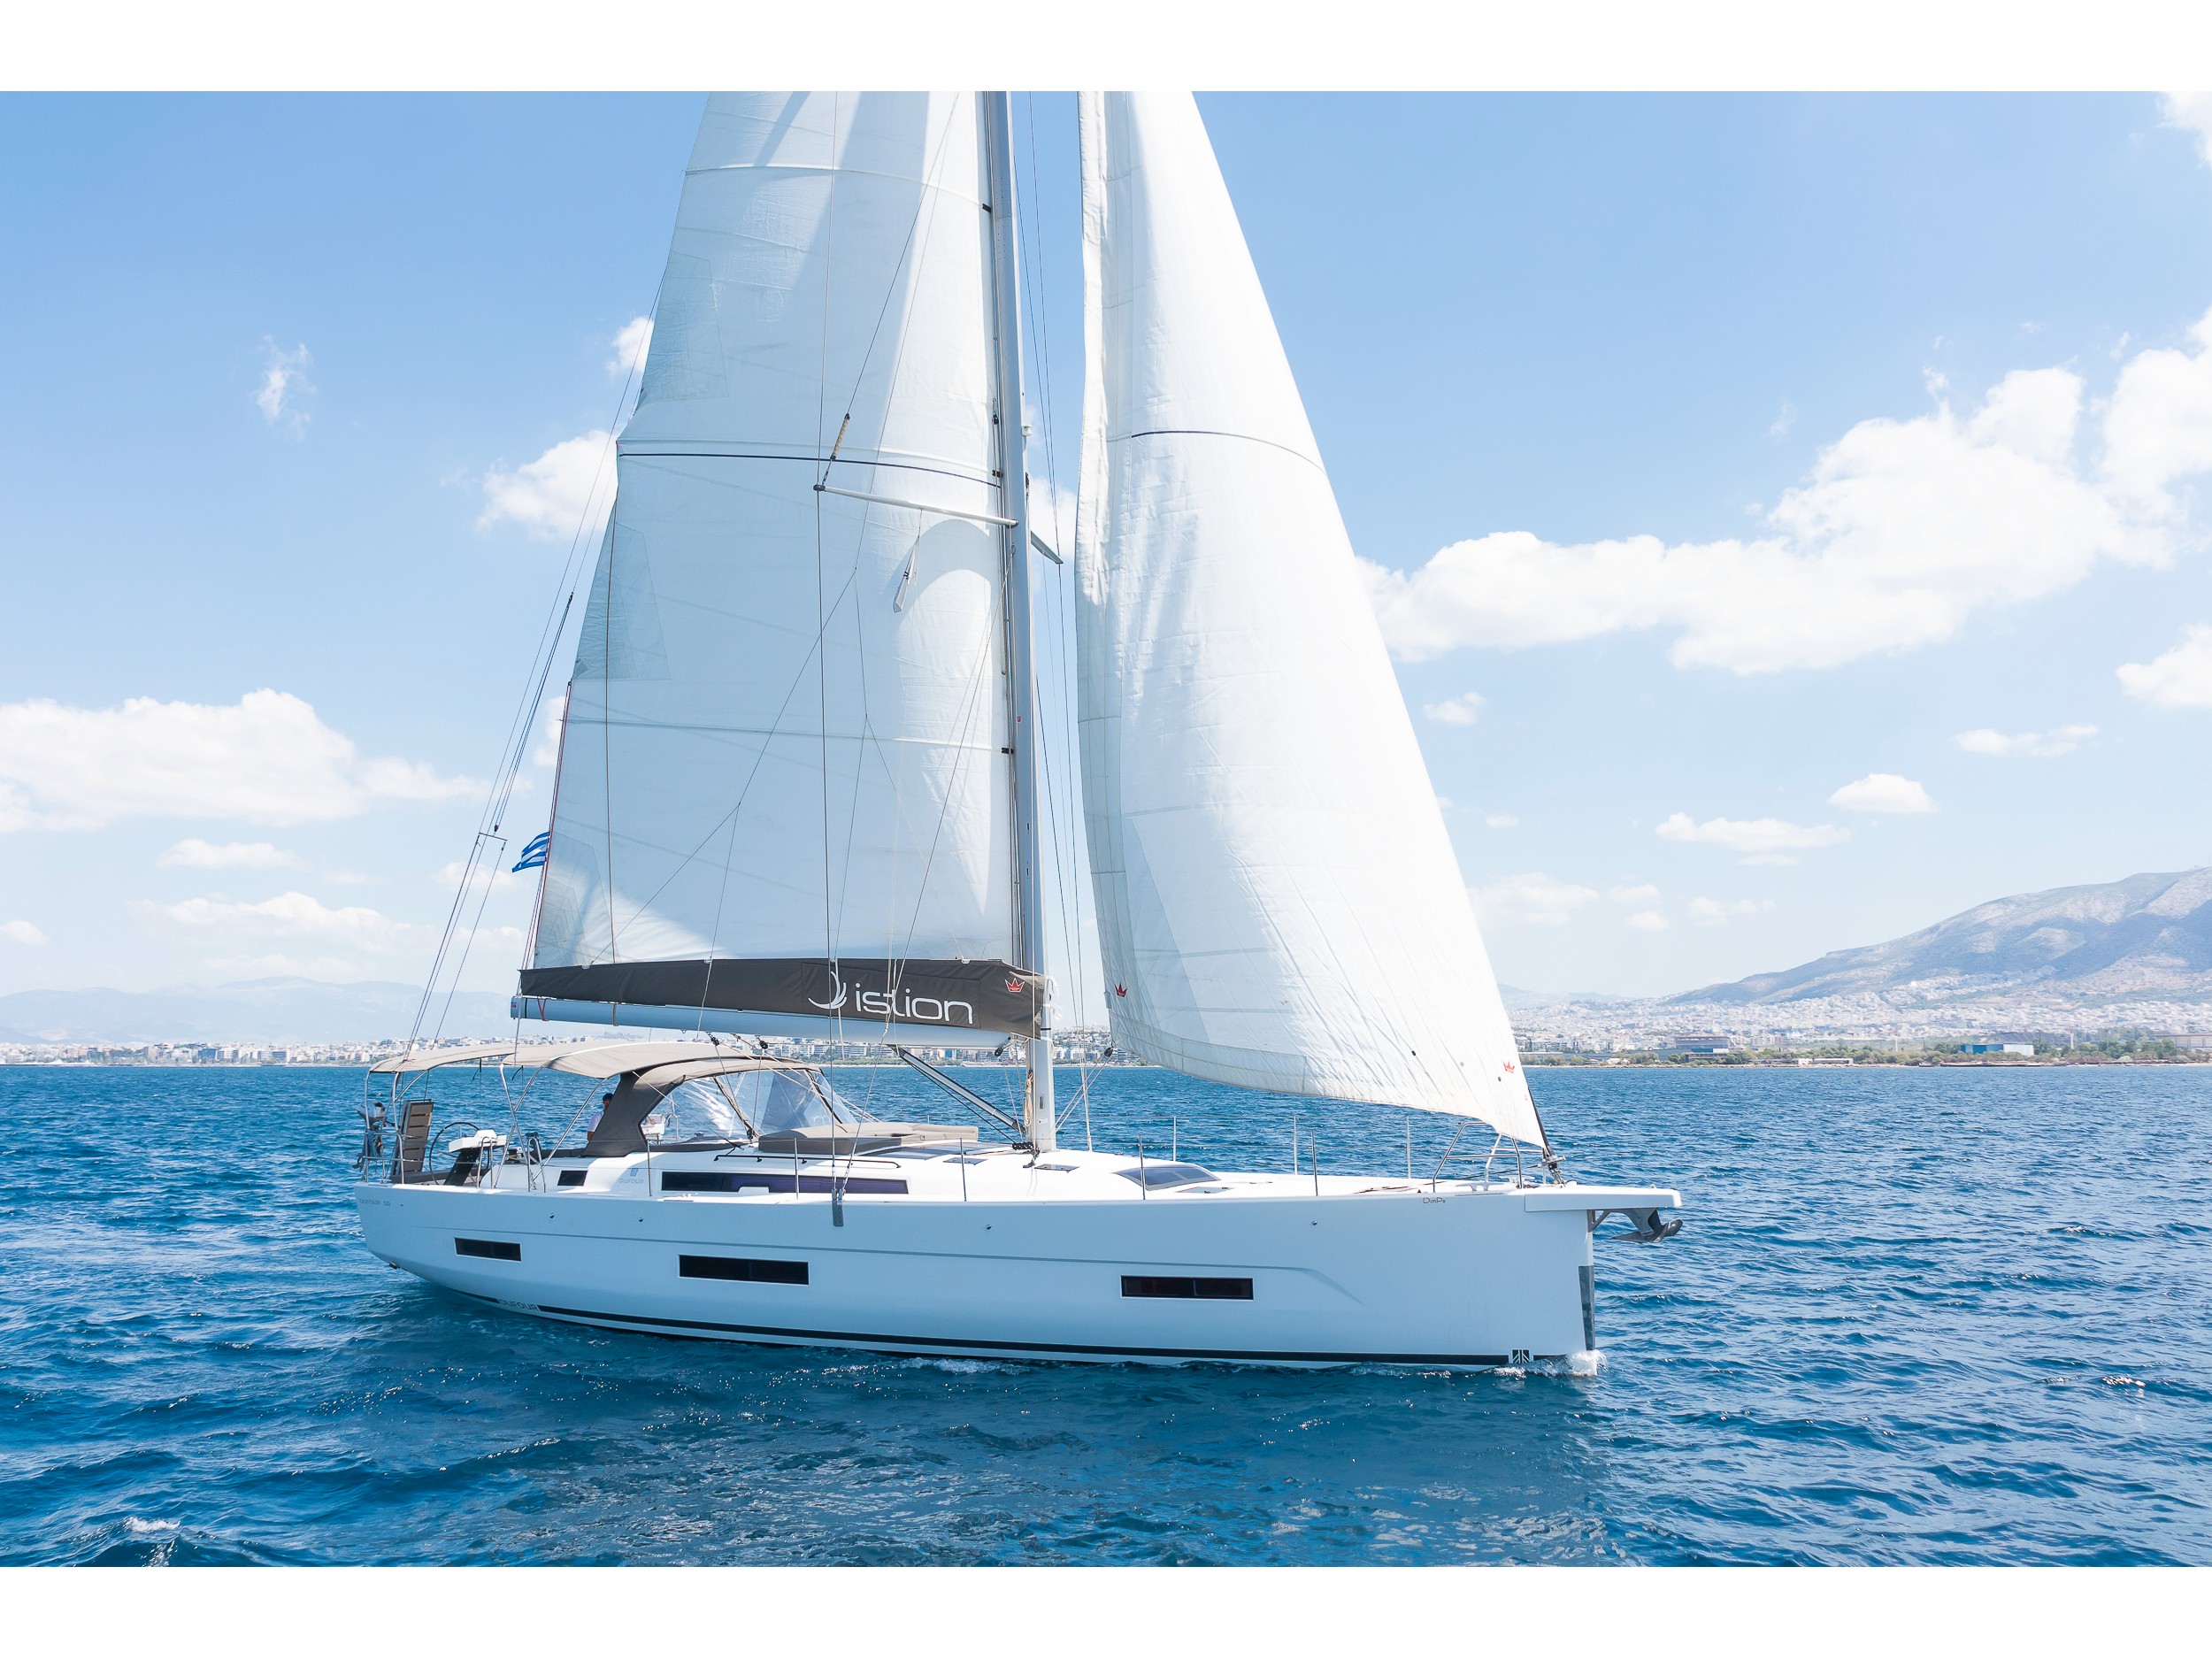 Yacht charter Dufour 530 A/C & GEN - Greece, Dodecanese, Appears